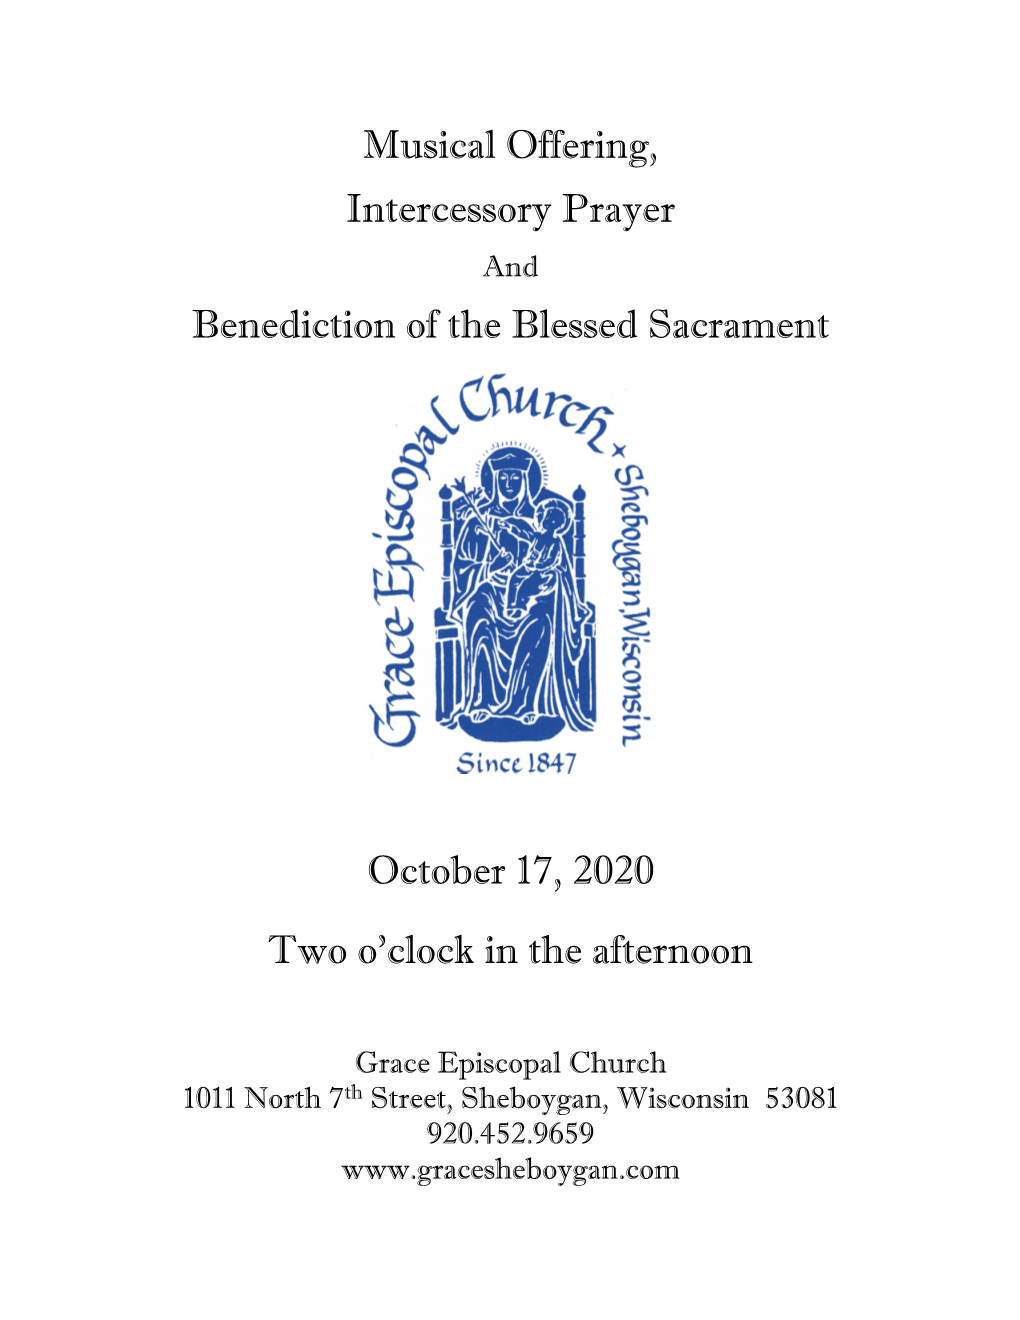 Musical Offering, Intercessory Prayer Benediction of the Blessed